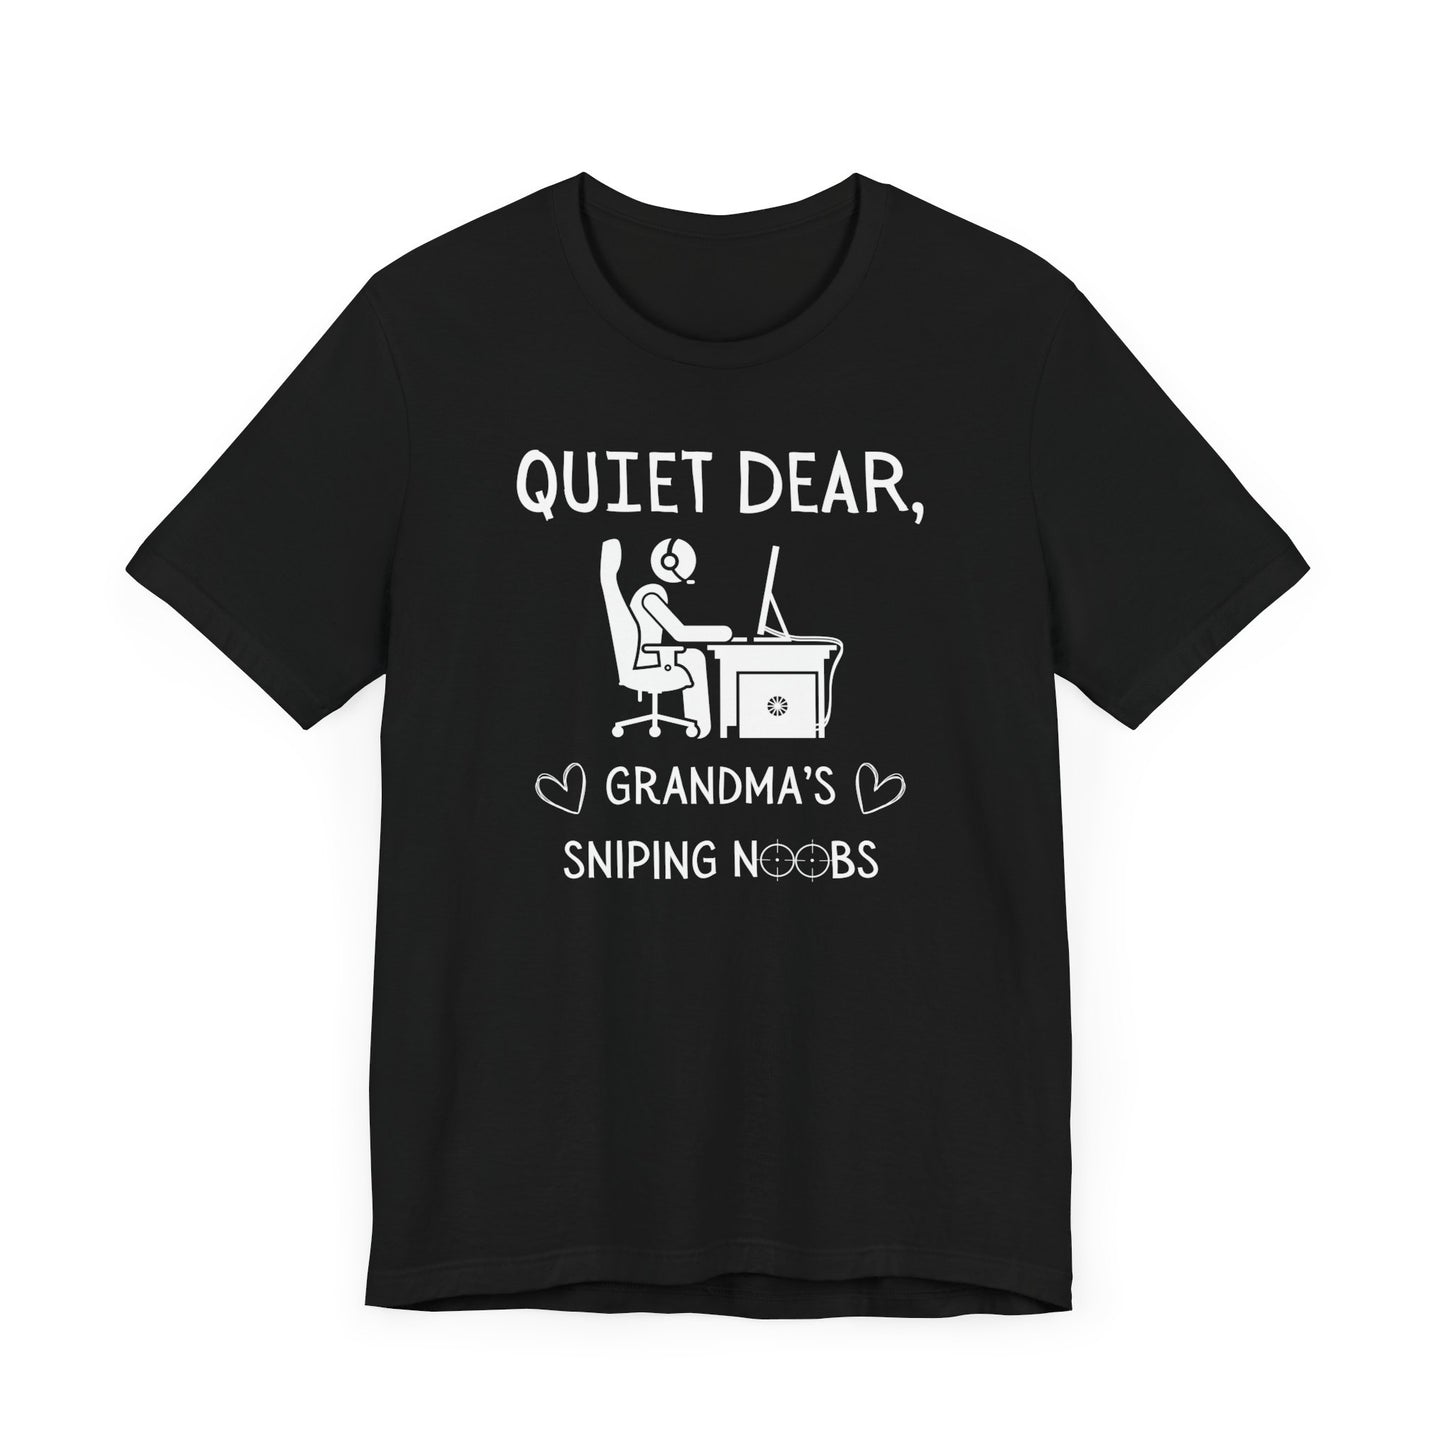 A flat image of a black t-shirt that reads Quiet Dear, Grandma's Sniping Noobs in white text. The lower text is framed by two hearts, and the O's are in the shape of sniper scopes. In the center of the shirt is an image of a person at a desk with a gaming PC.